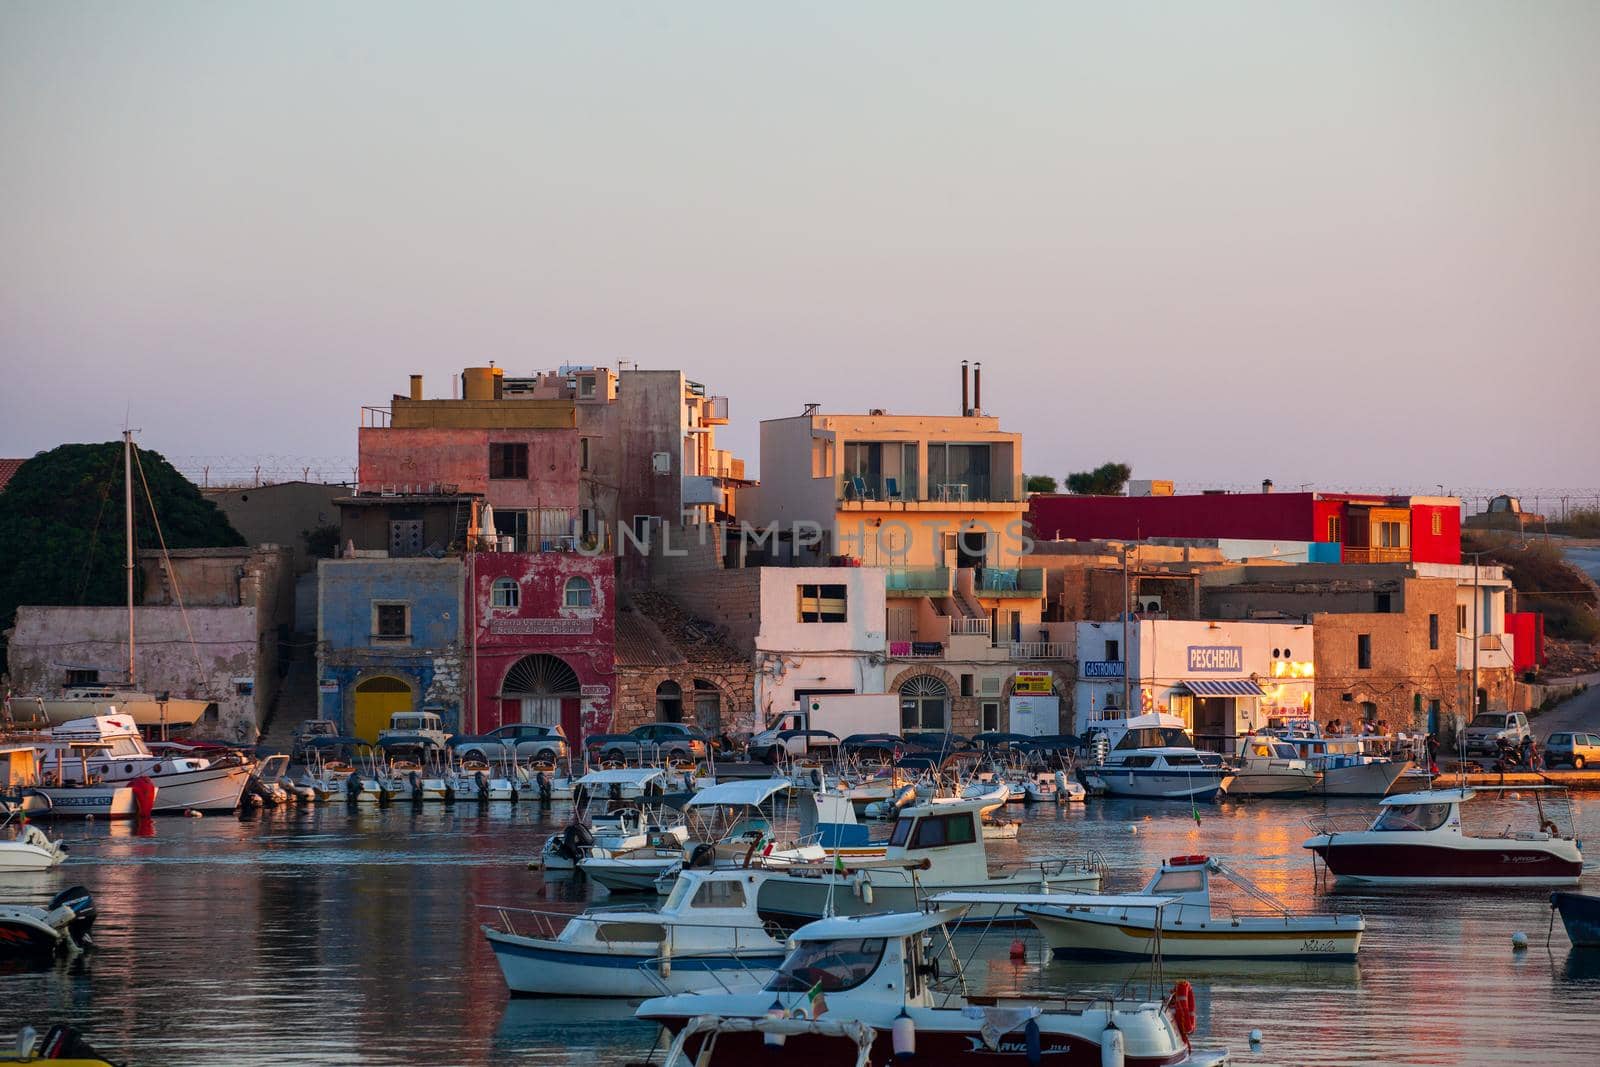 View of the old town of Lampedusa by bepsimage